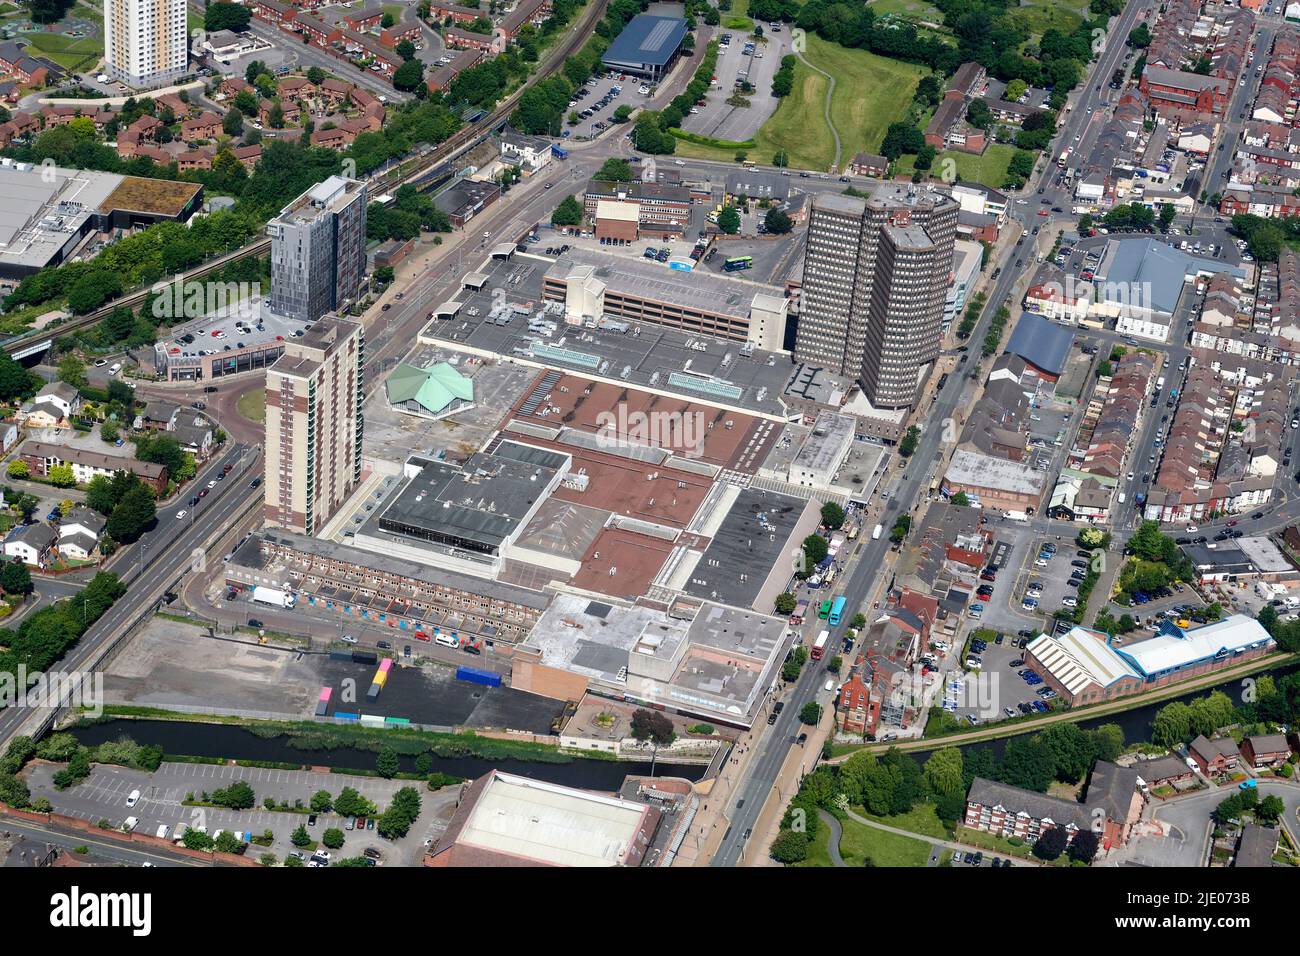 An aerial photograph of the Strand Shopping Centre, Bootle, Liverpool, merseyside, north west england, UK Stock Photo